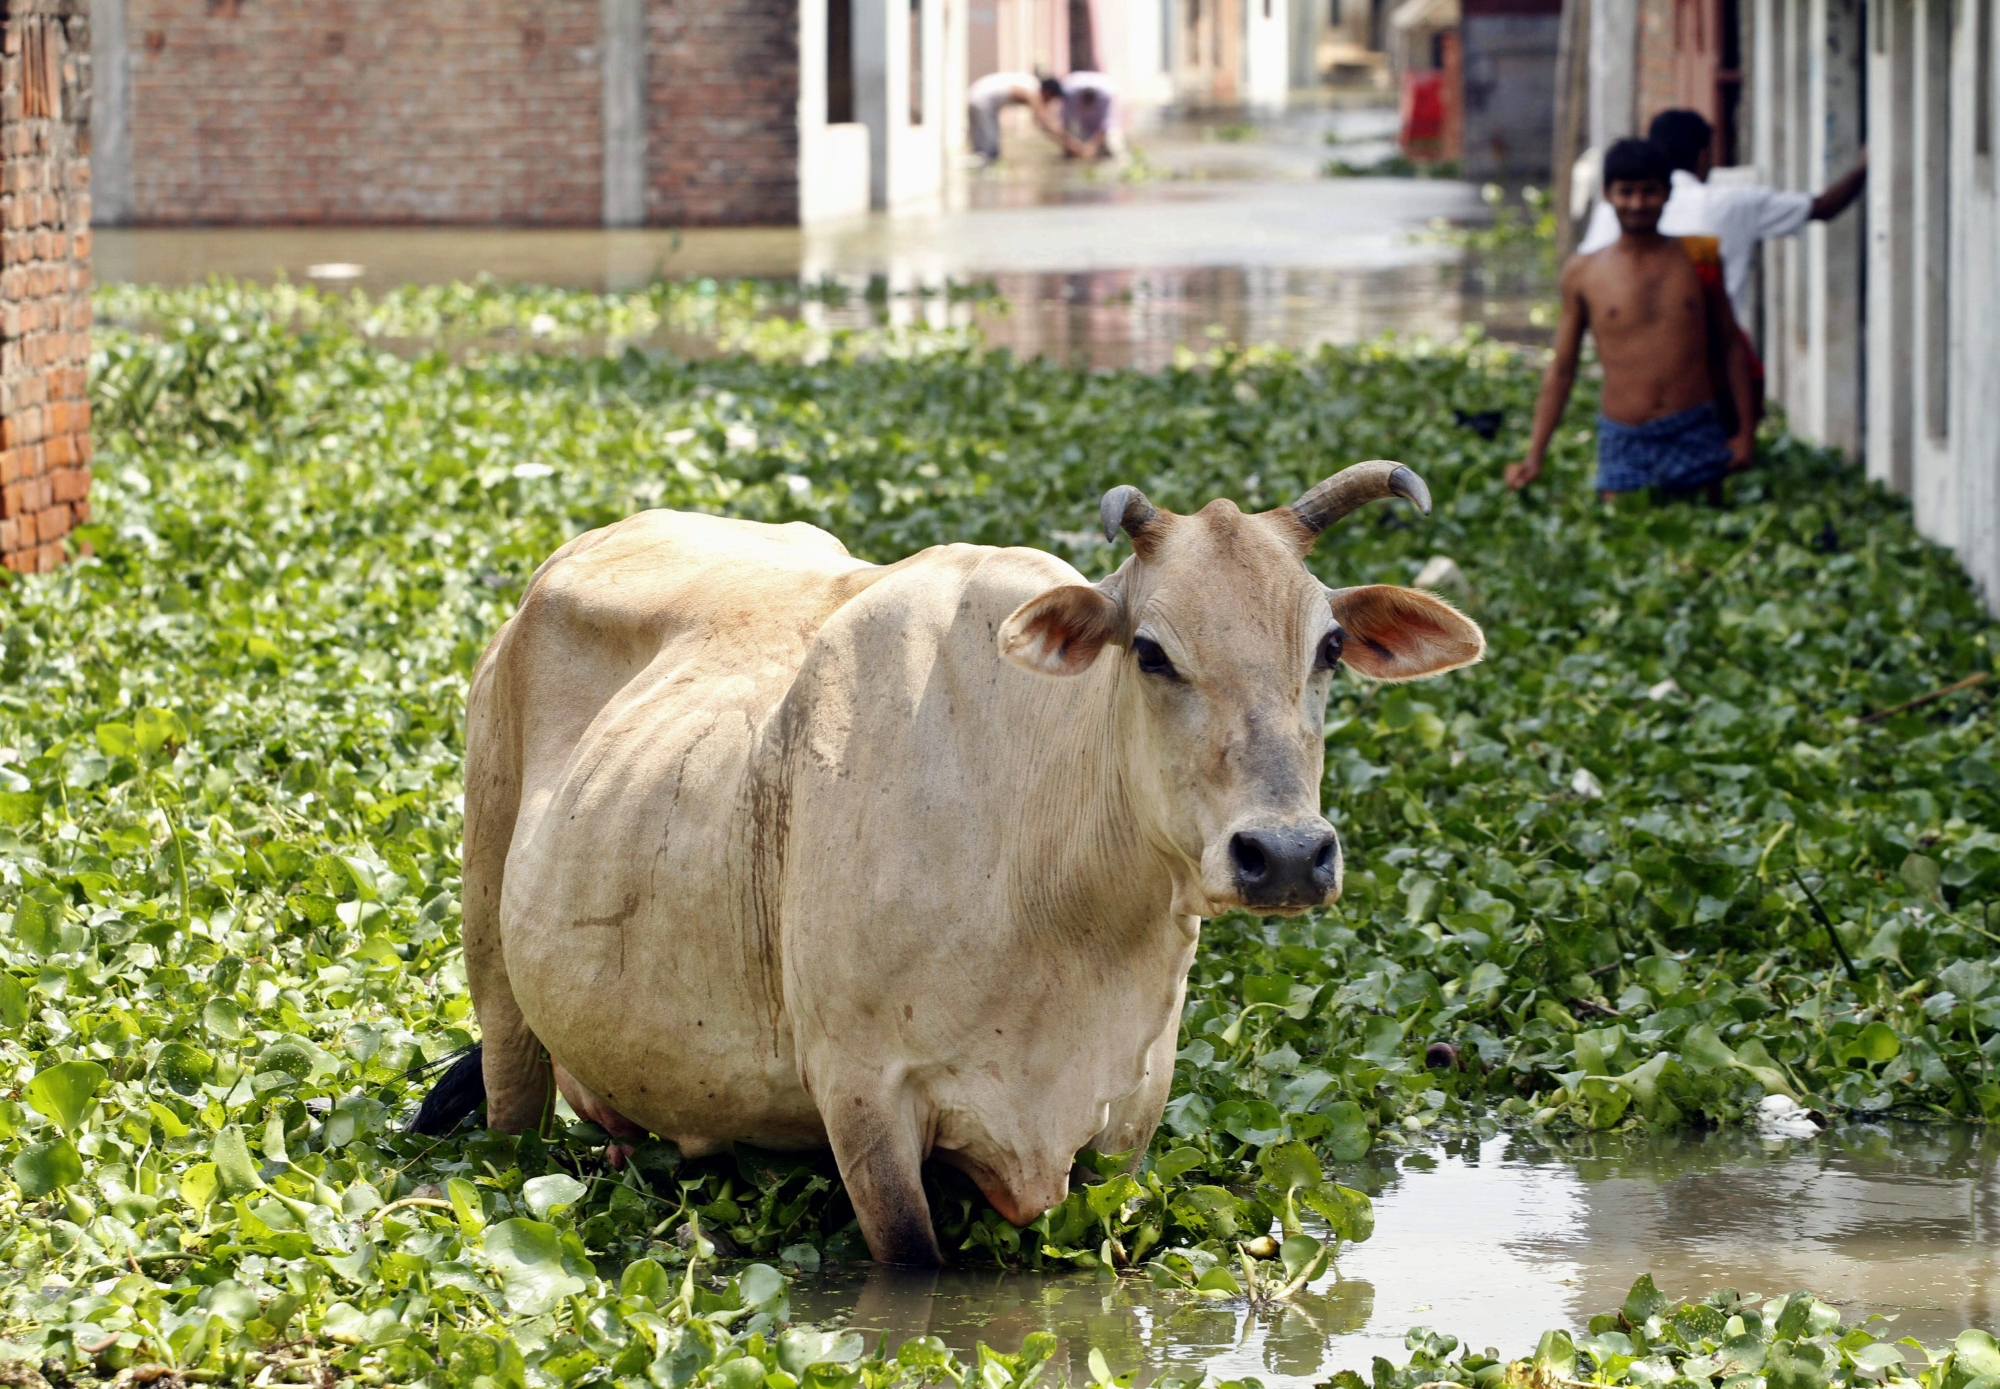 A cow wades through a flooded street filled with water hyacinth after monsoon rains in Allahabad, India, Thursday, Aug. 1, 2013. India's monsoon season, which runs from June through September, brings rains that are vital to agriculture but also cause floods and landslides. (AP Photo/Rajesh Kumar Singh) India Monsoon Flooding